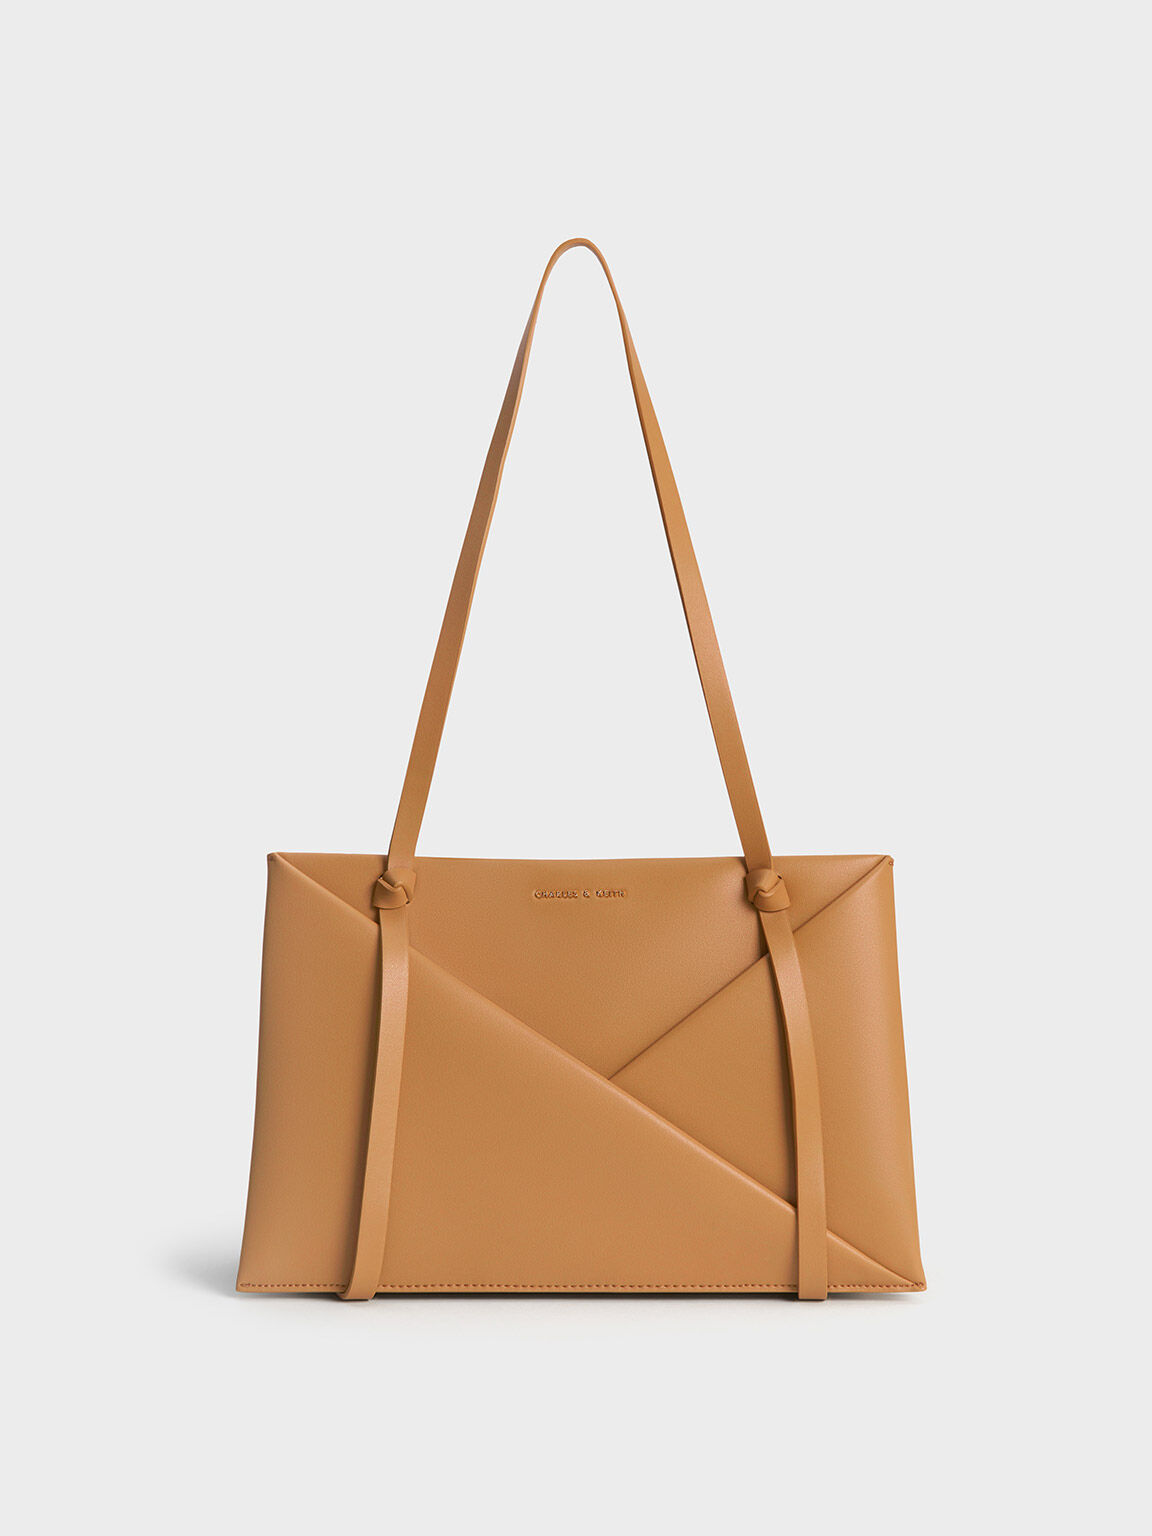 Thoughts on Dark Taupe?? : r/handbags